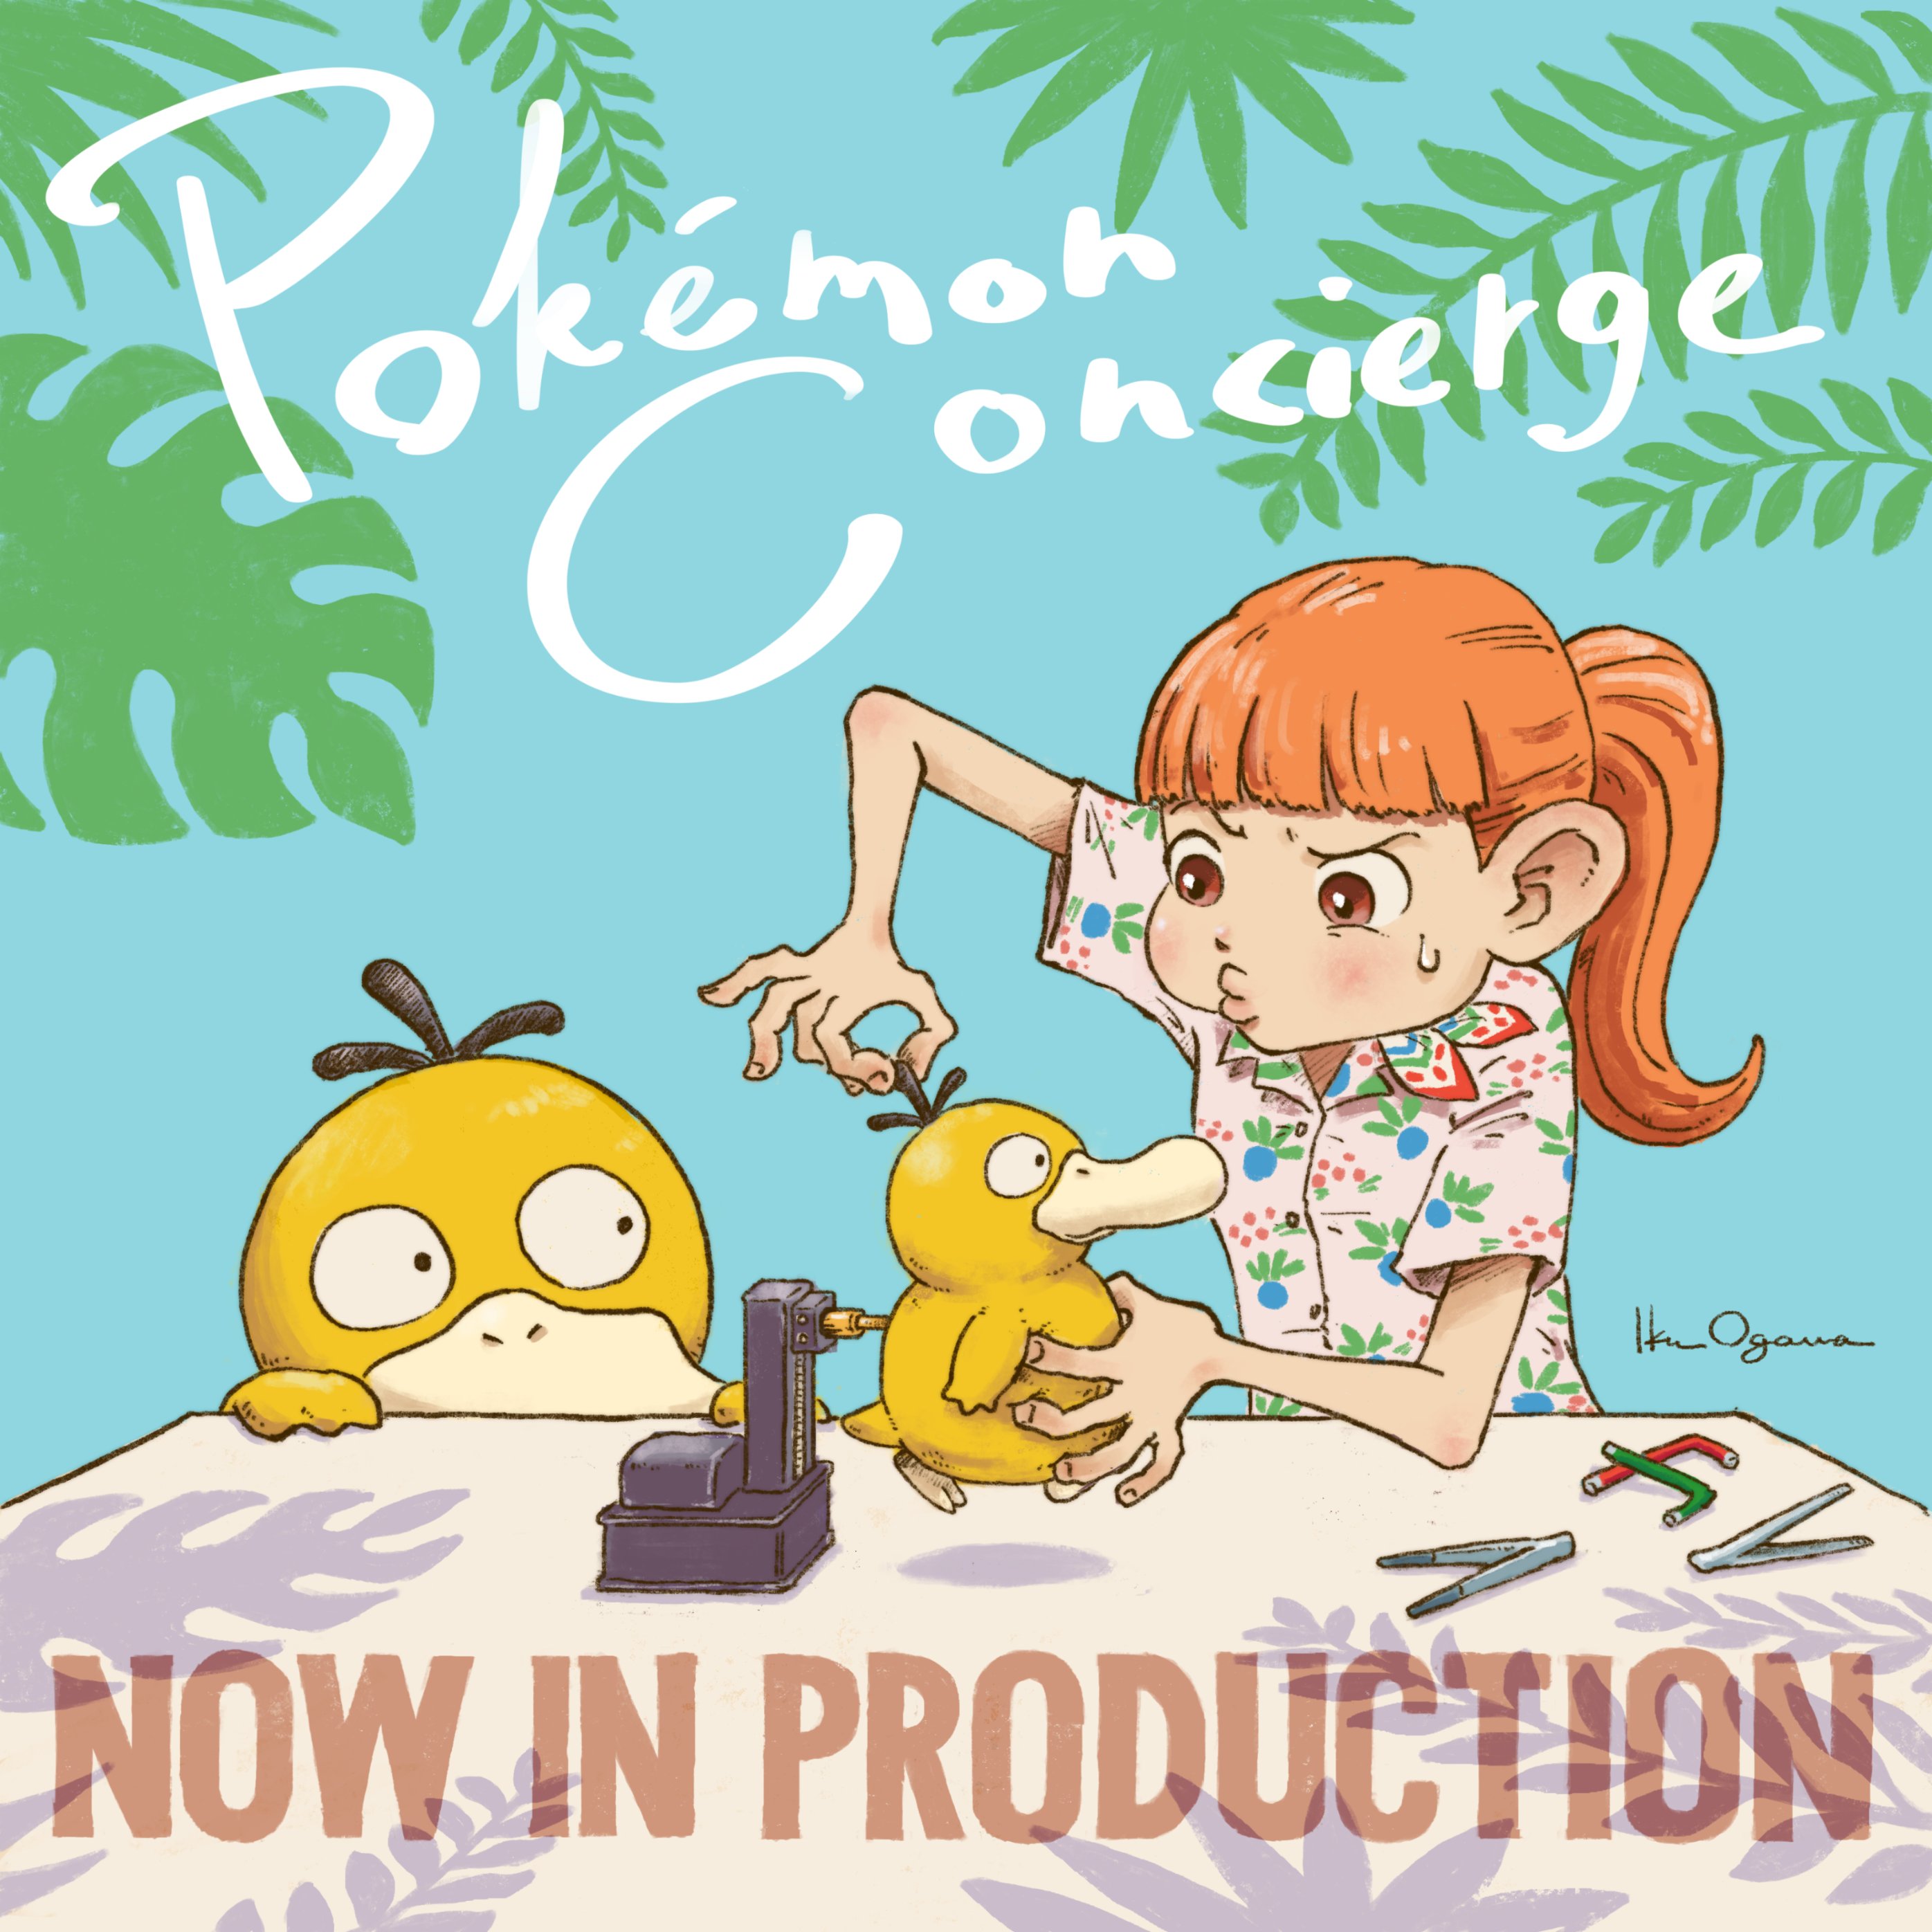 Pokémon on X: "Exciting news, Trainers! New episodes of Pokémon Concierge  are in production! Stay tuned for updates! 🏖 https://t.co/NE3ZwwmCXz" / X